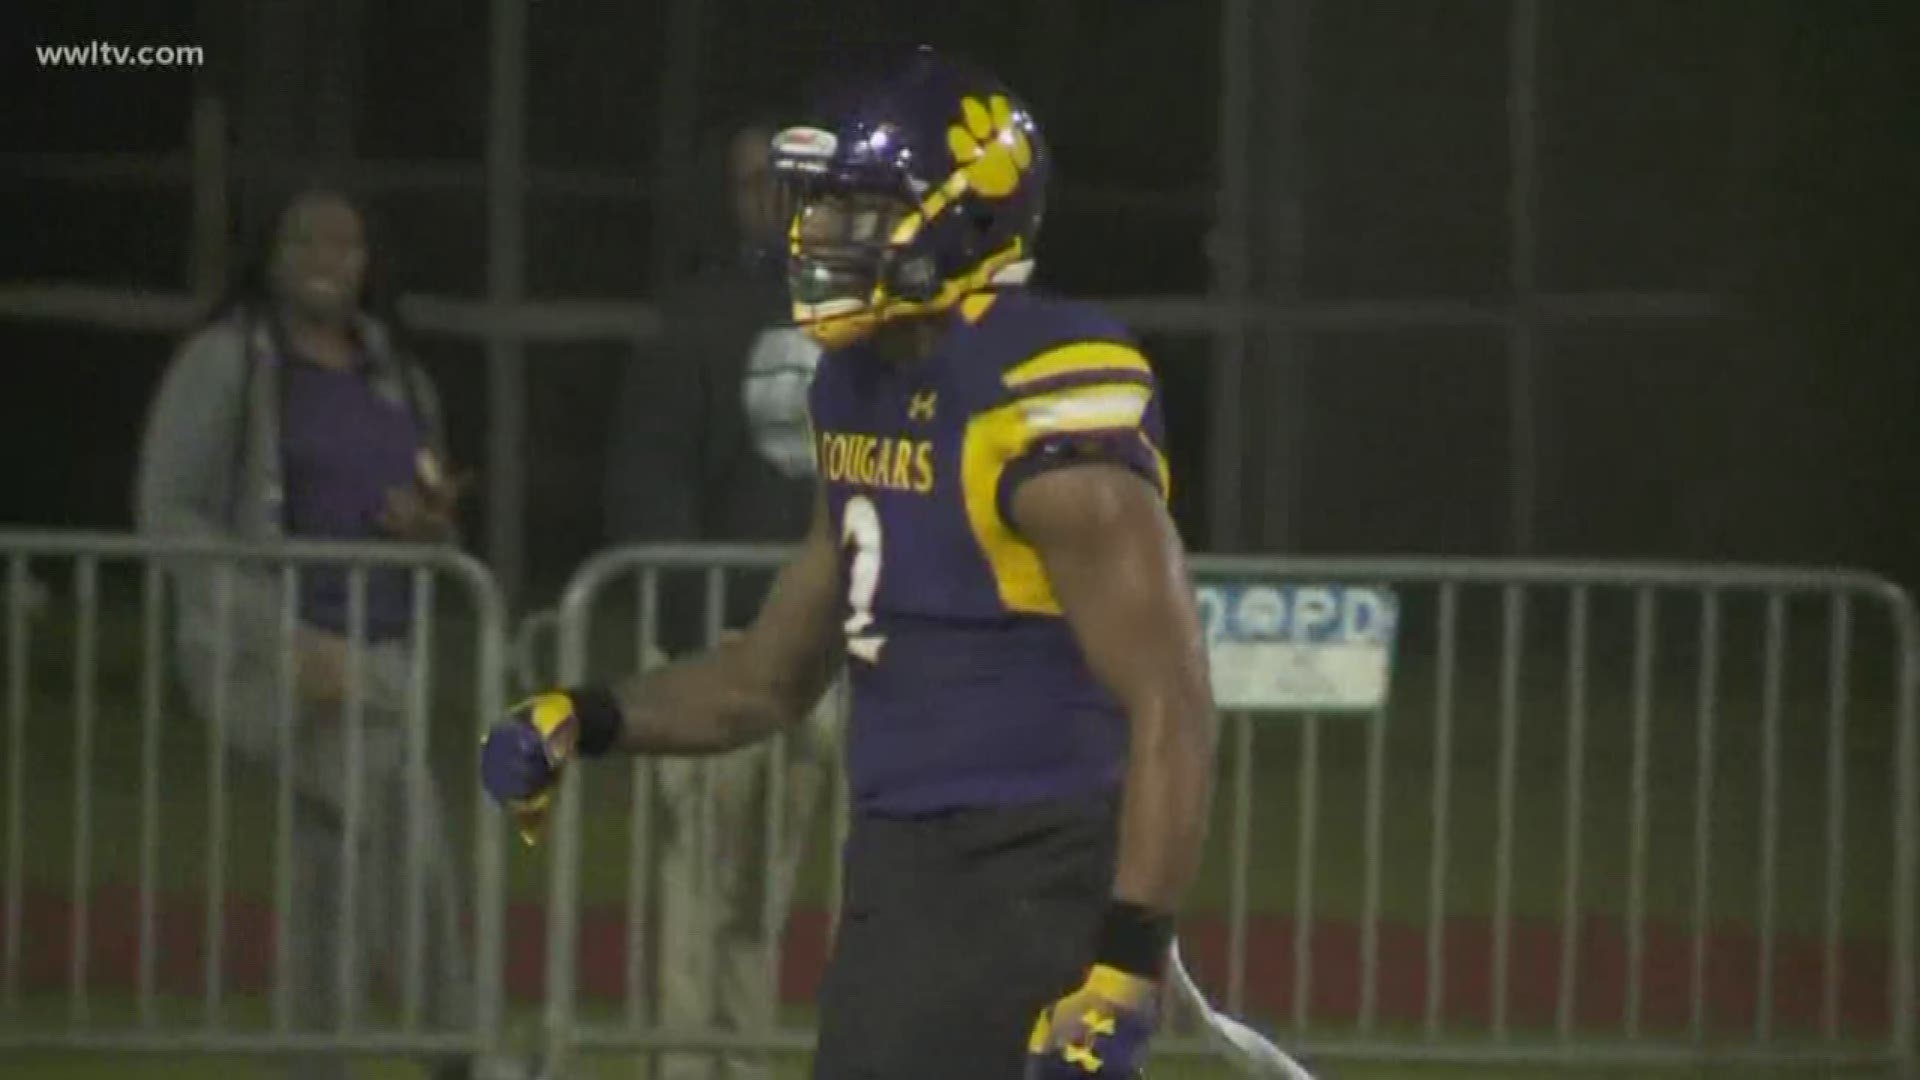 Karr and Easton will meet each other in the Mercedes-Benz Superdome next weekend for the 4A state title after each vanquished opponents in the semifinal games Friday.